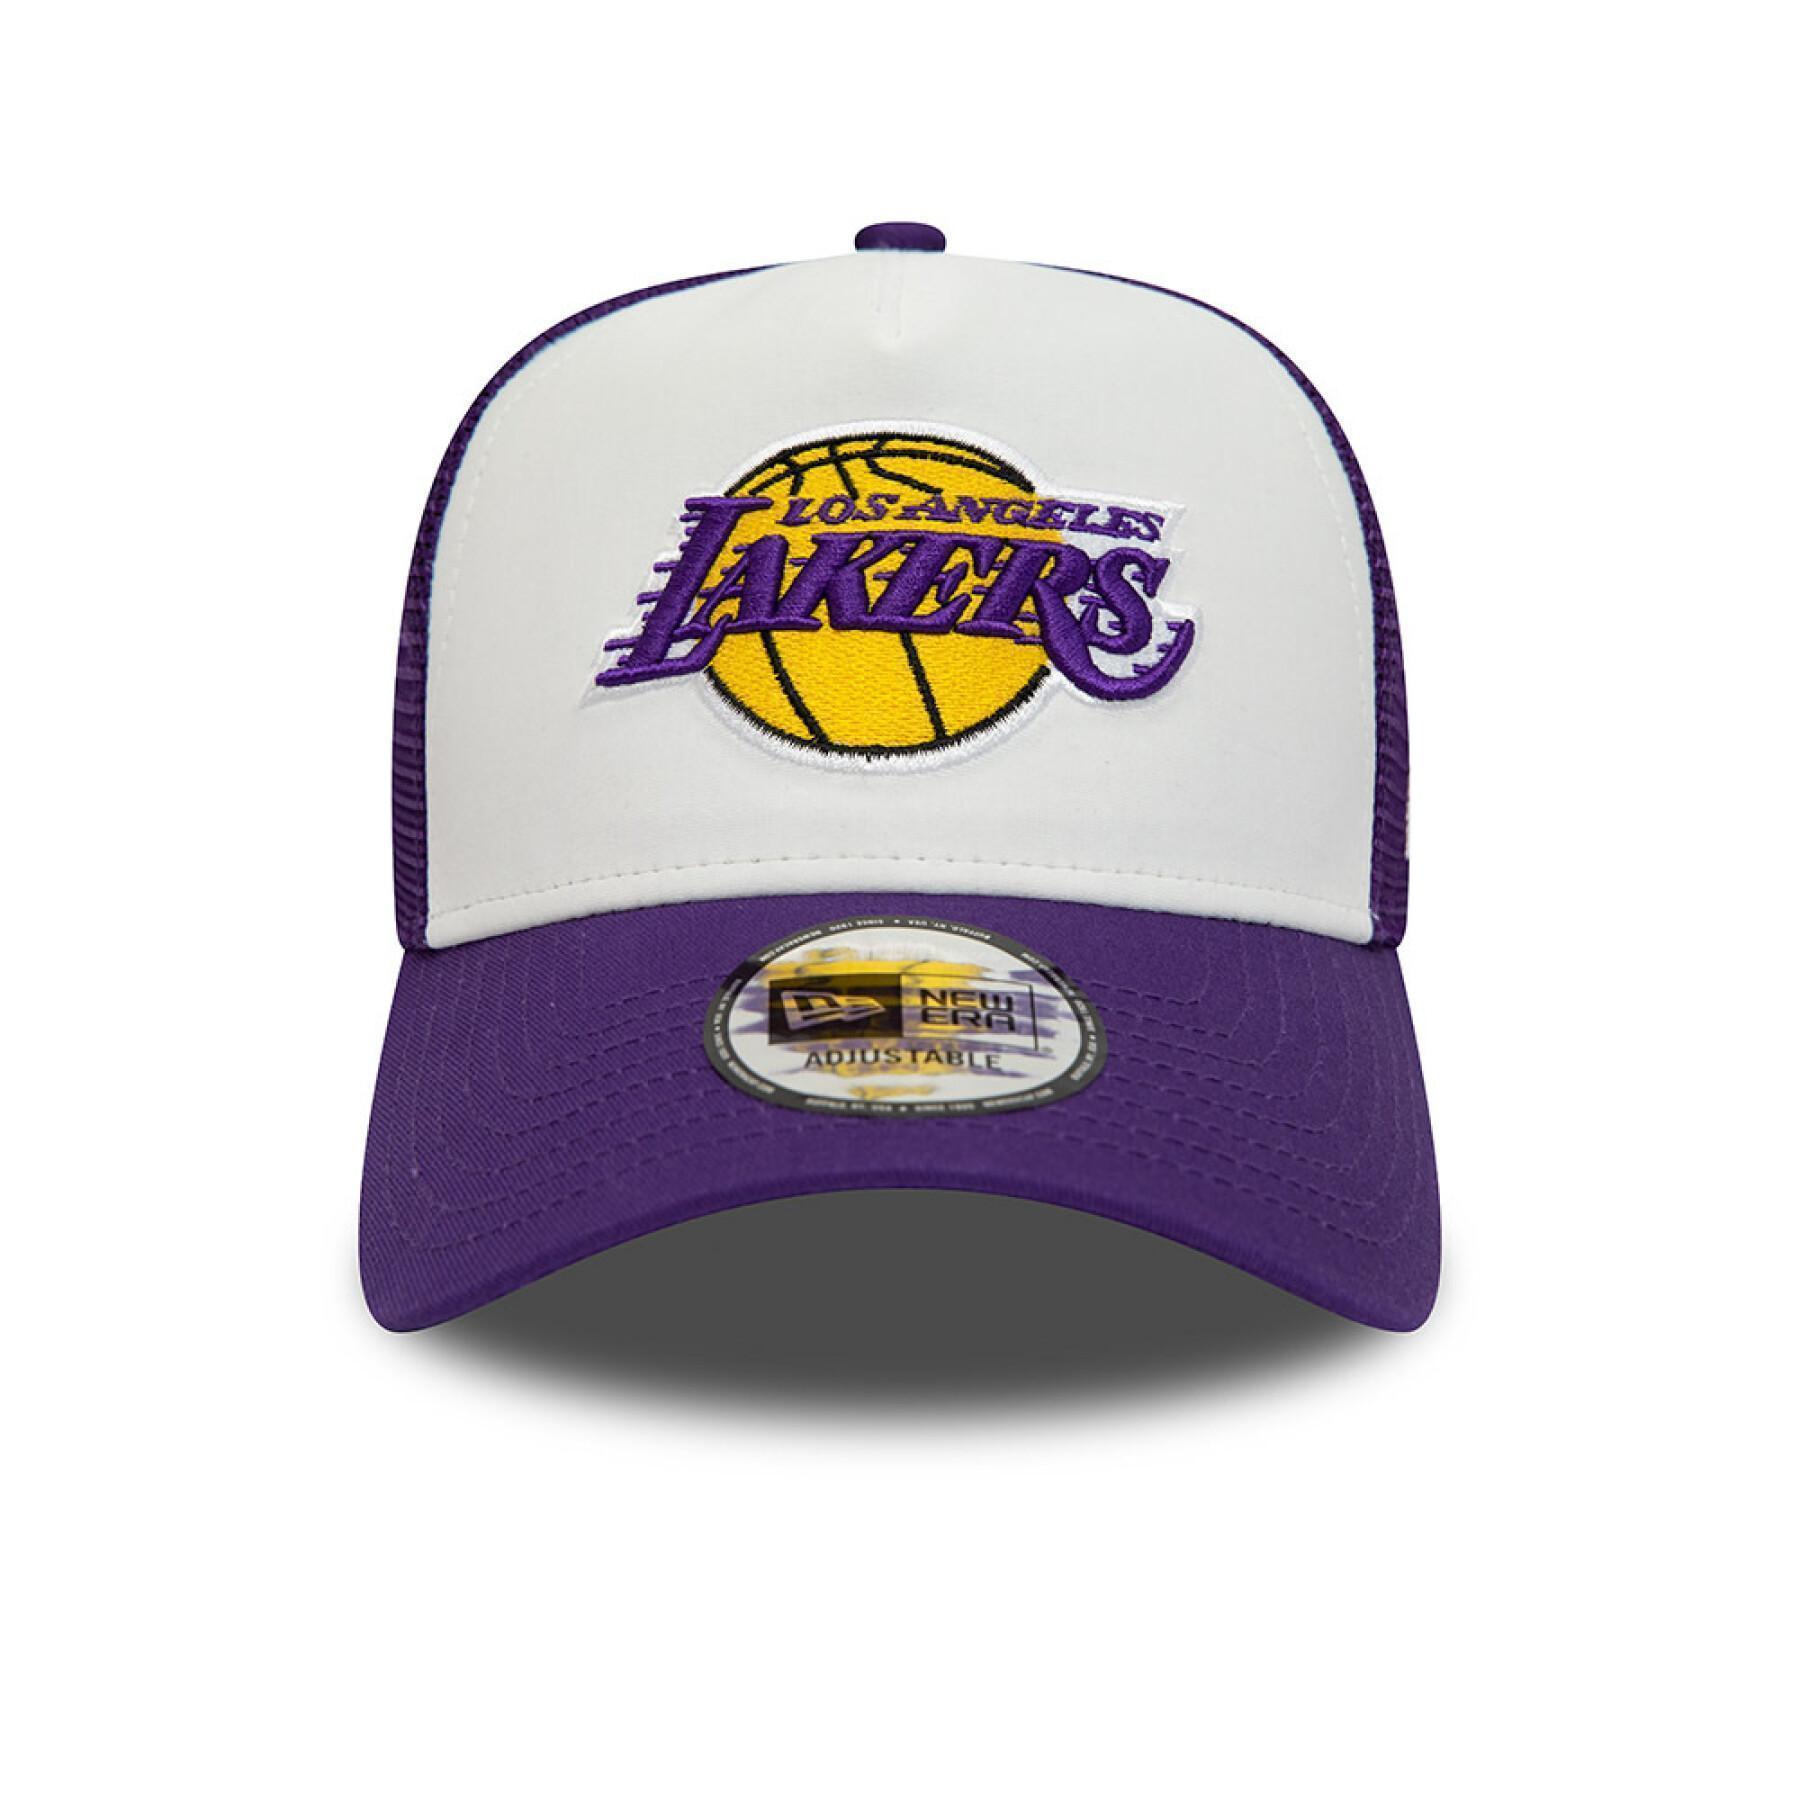 Casquette Trucker Los Angeles Lakers